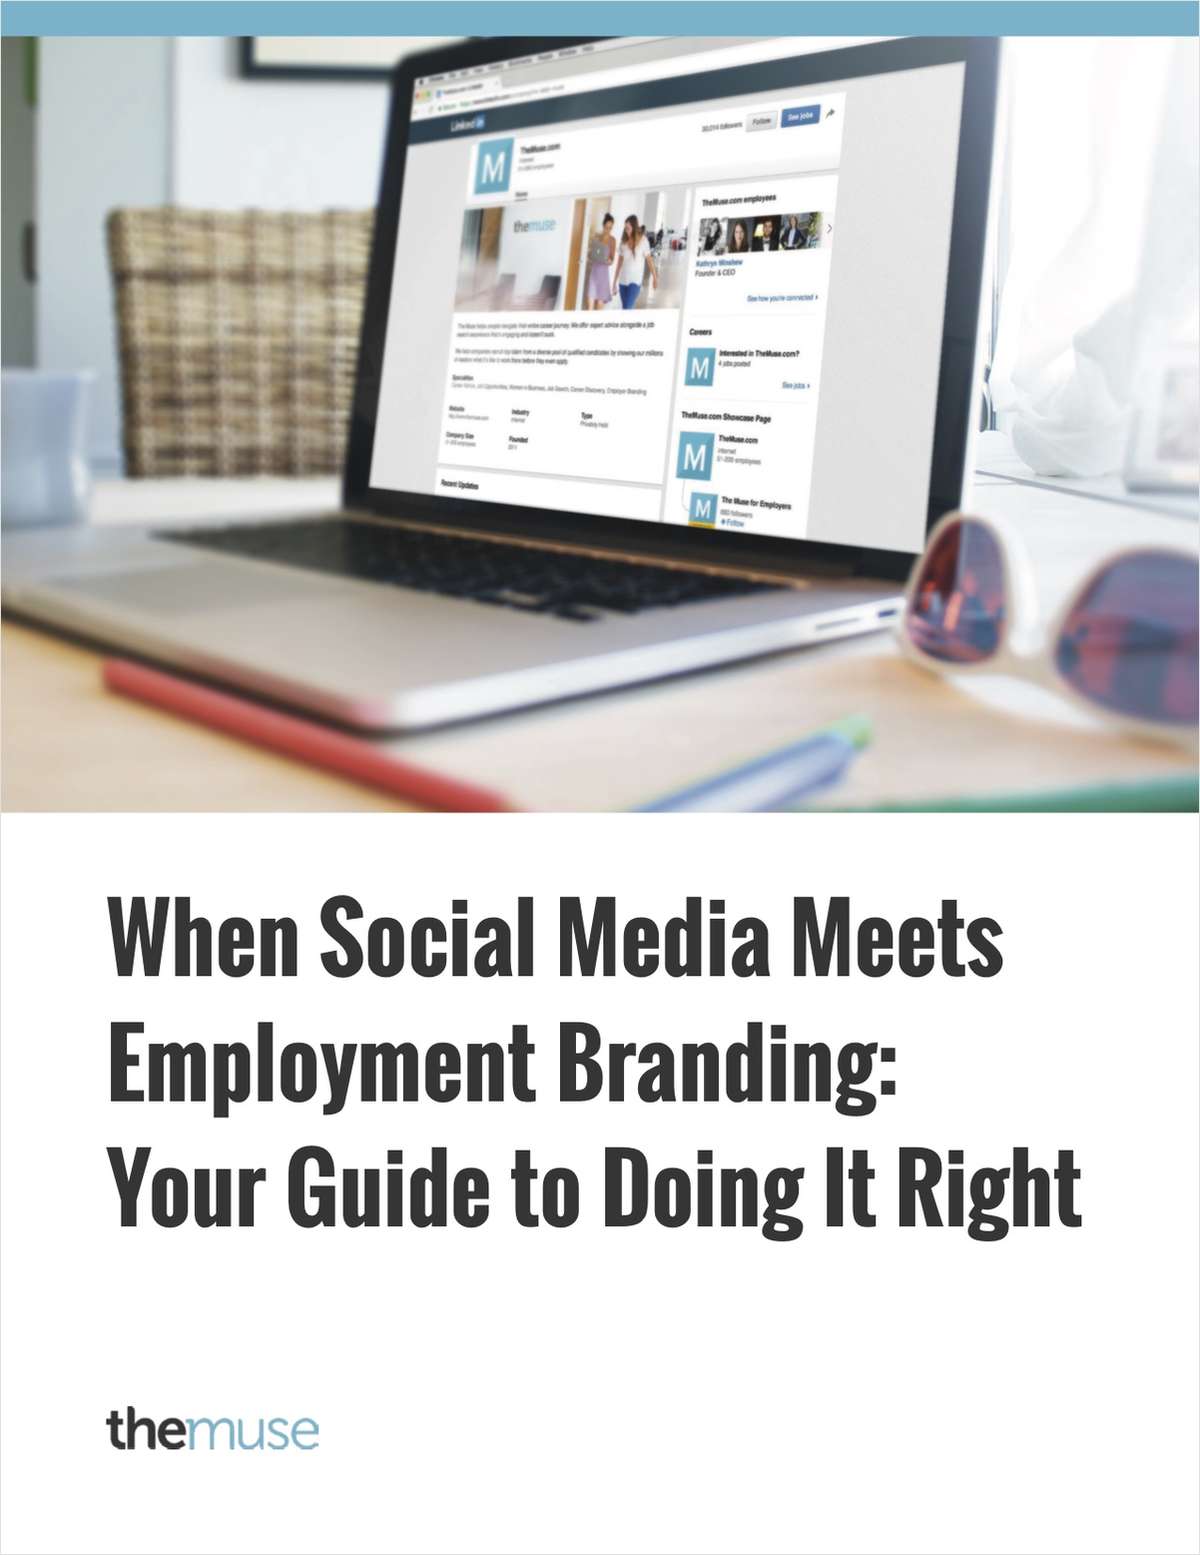 When Social Media Meets Employer Branding: Your Guide to Doing it Right